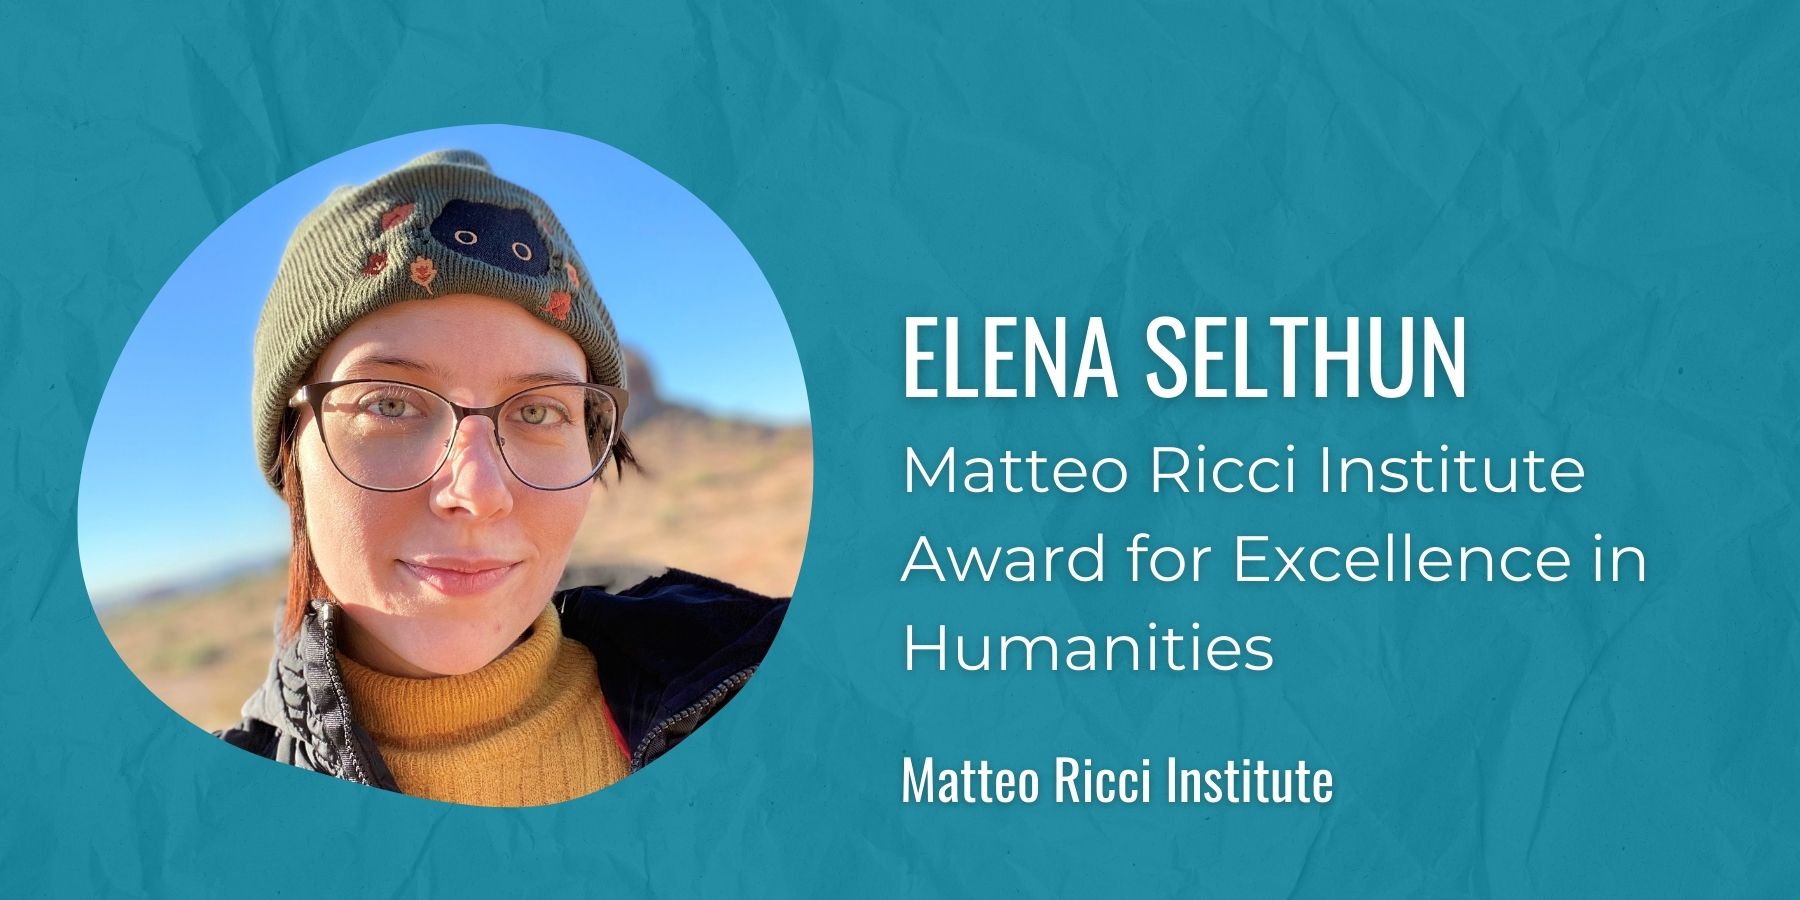 Image of Elena Selthun text Matteo Ricci Institute Award for Excellence in Humanities